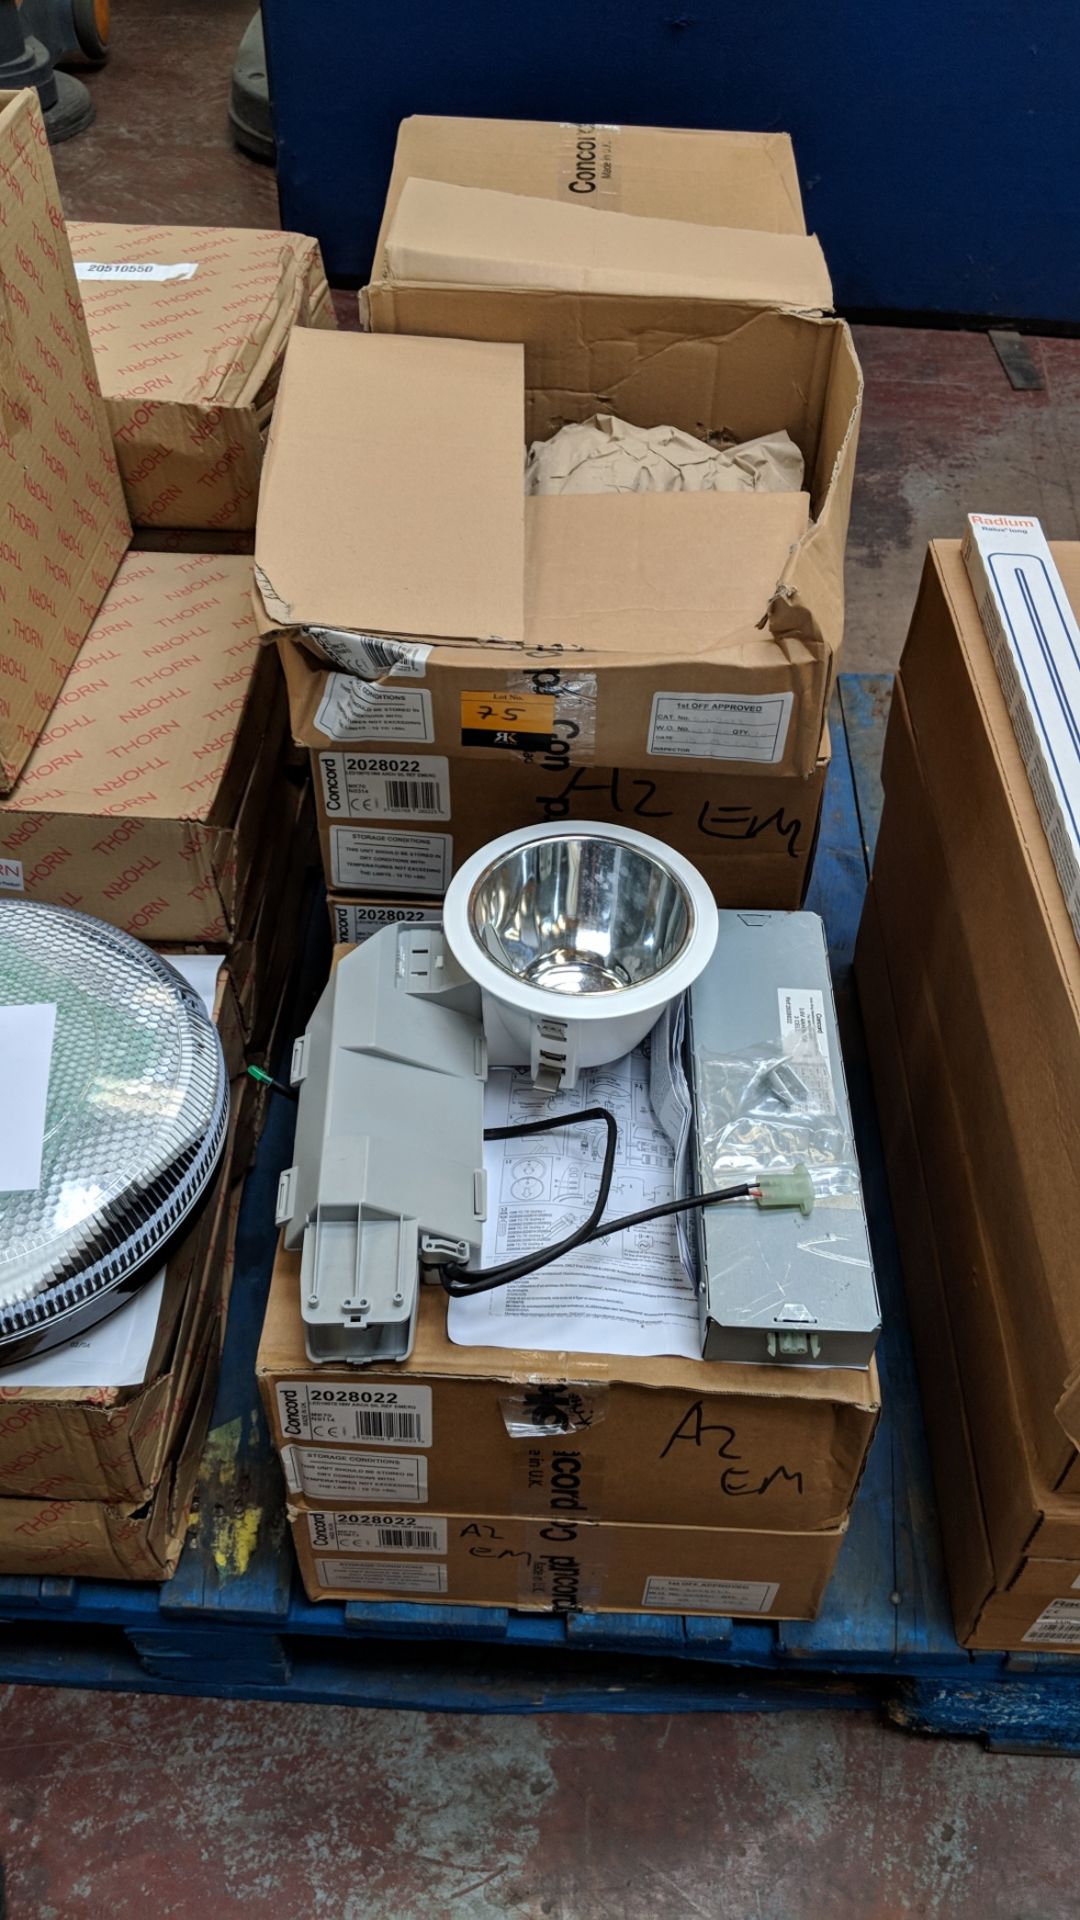 10 off Concord model 2028022 LED 100 TE 18W arch light fittings IMPORTANT: Please remember goods